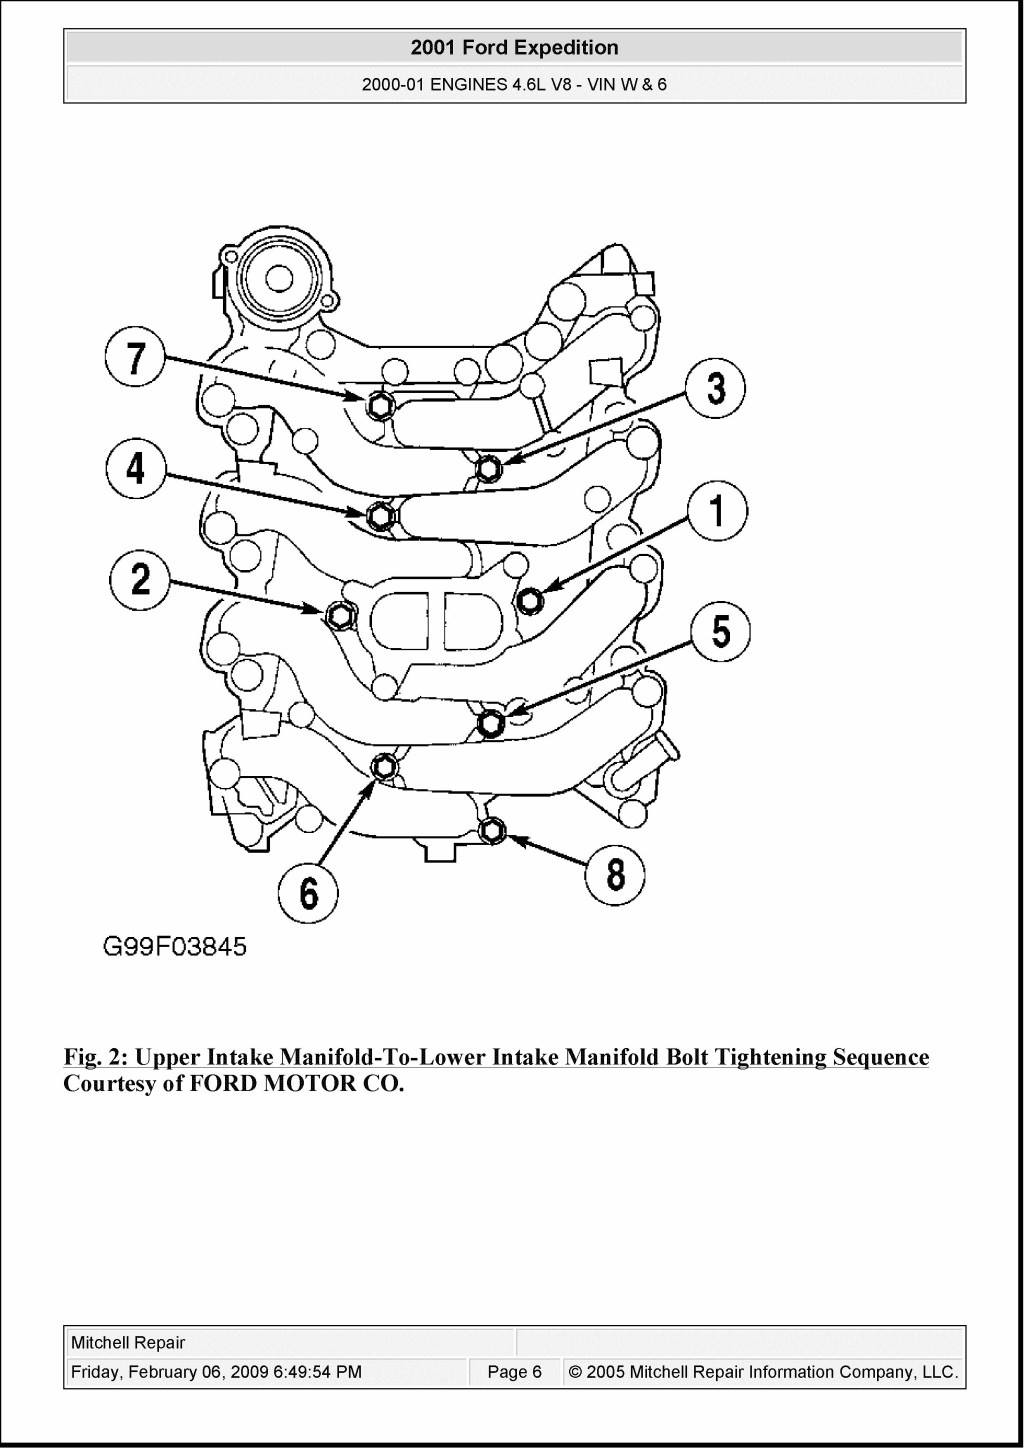 Picture of: FORD EXPEDITION Service Repair Manual by kmdwisbnvmk – Issuu